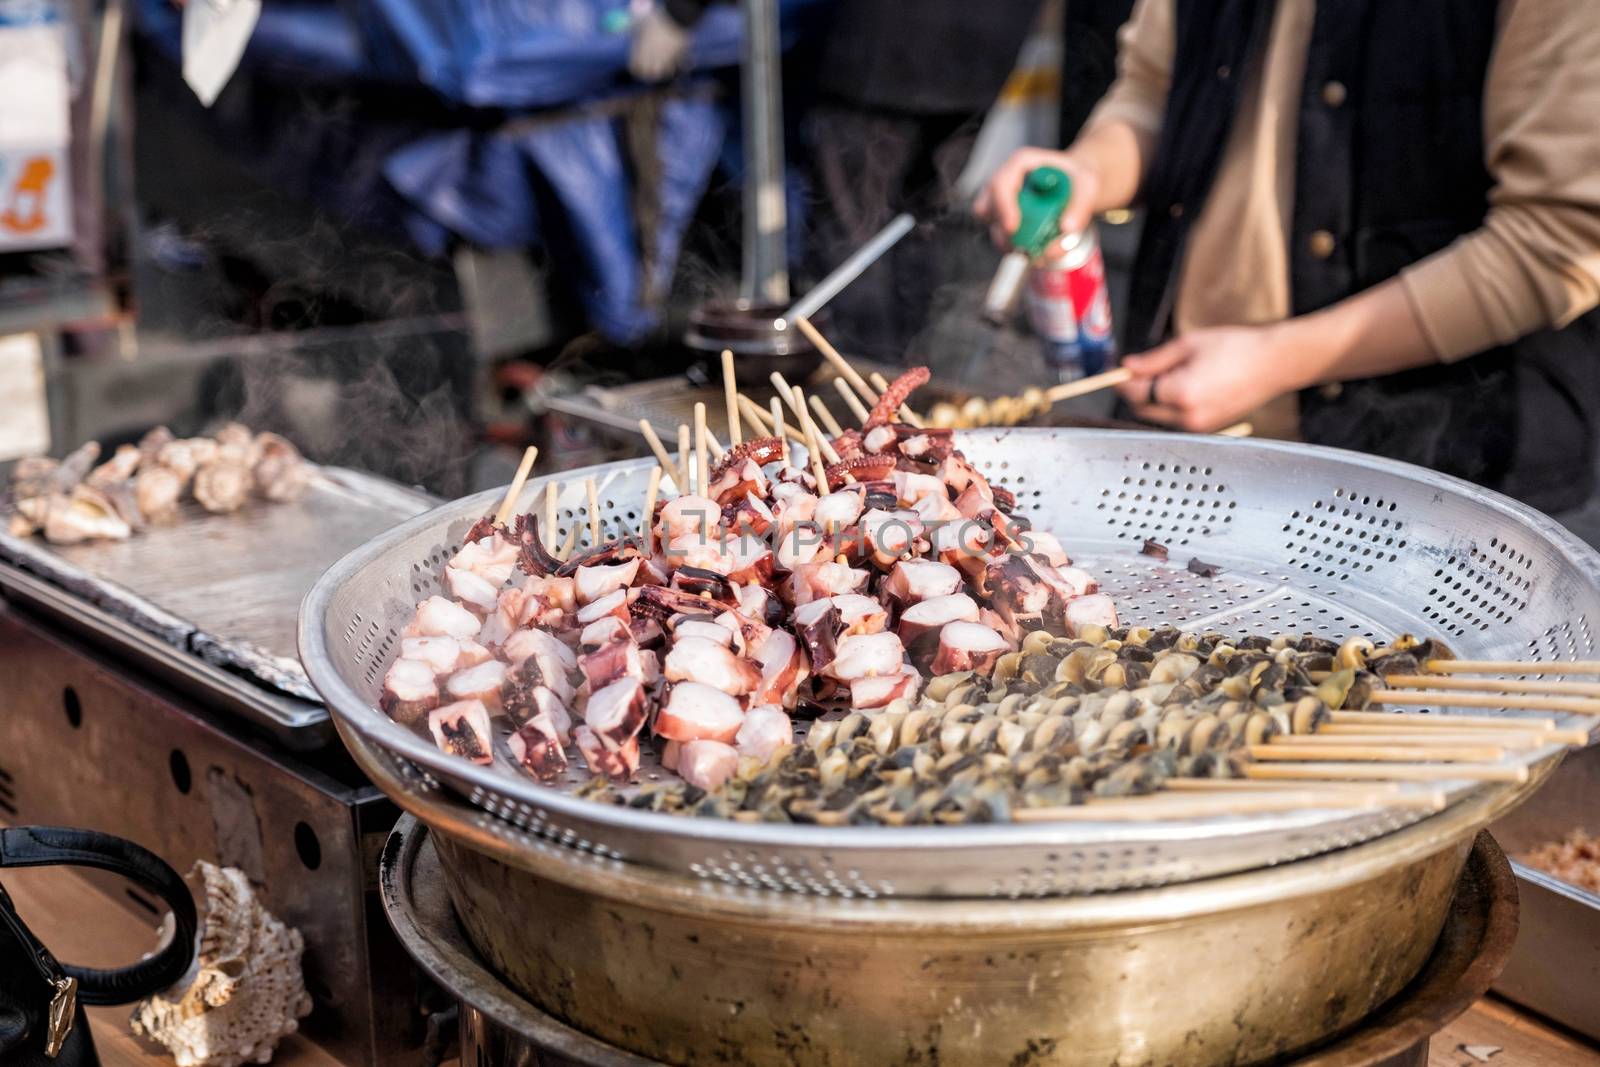 Steamed Octopus Legs  street food at Myeong-dong, Seoul, South K by Surasak